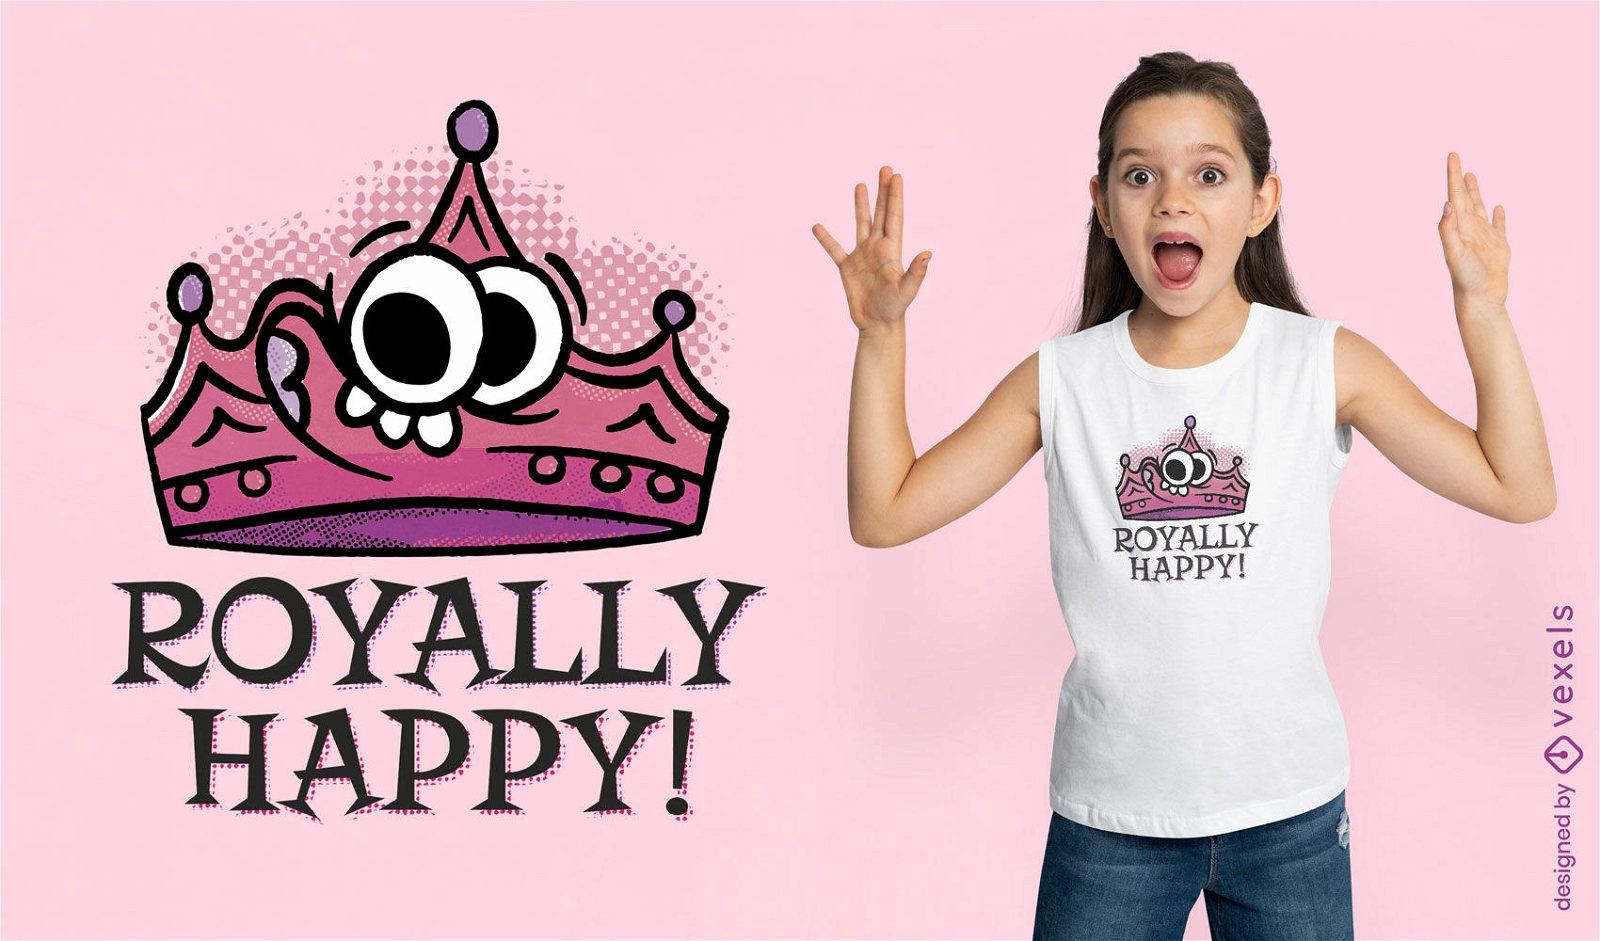 Royally happy crown character t-shirt design